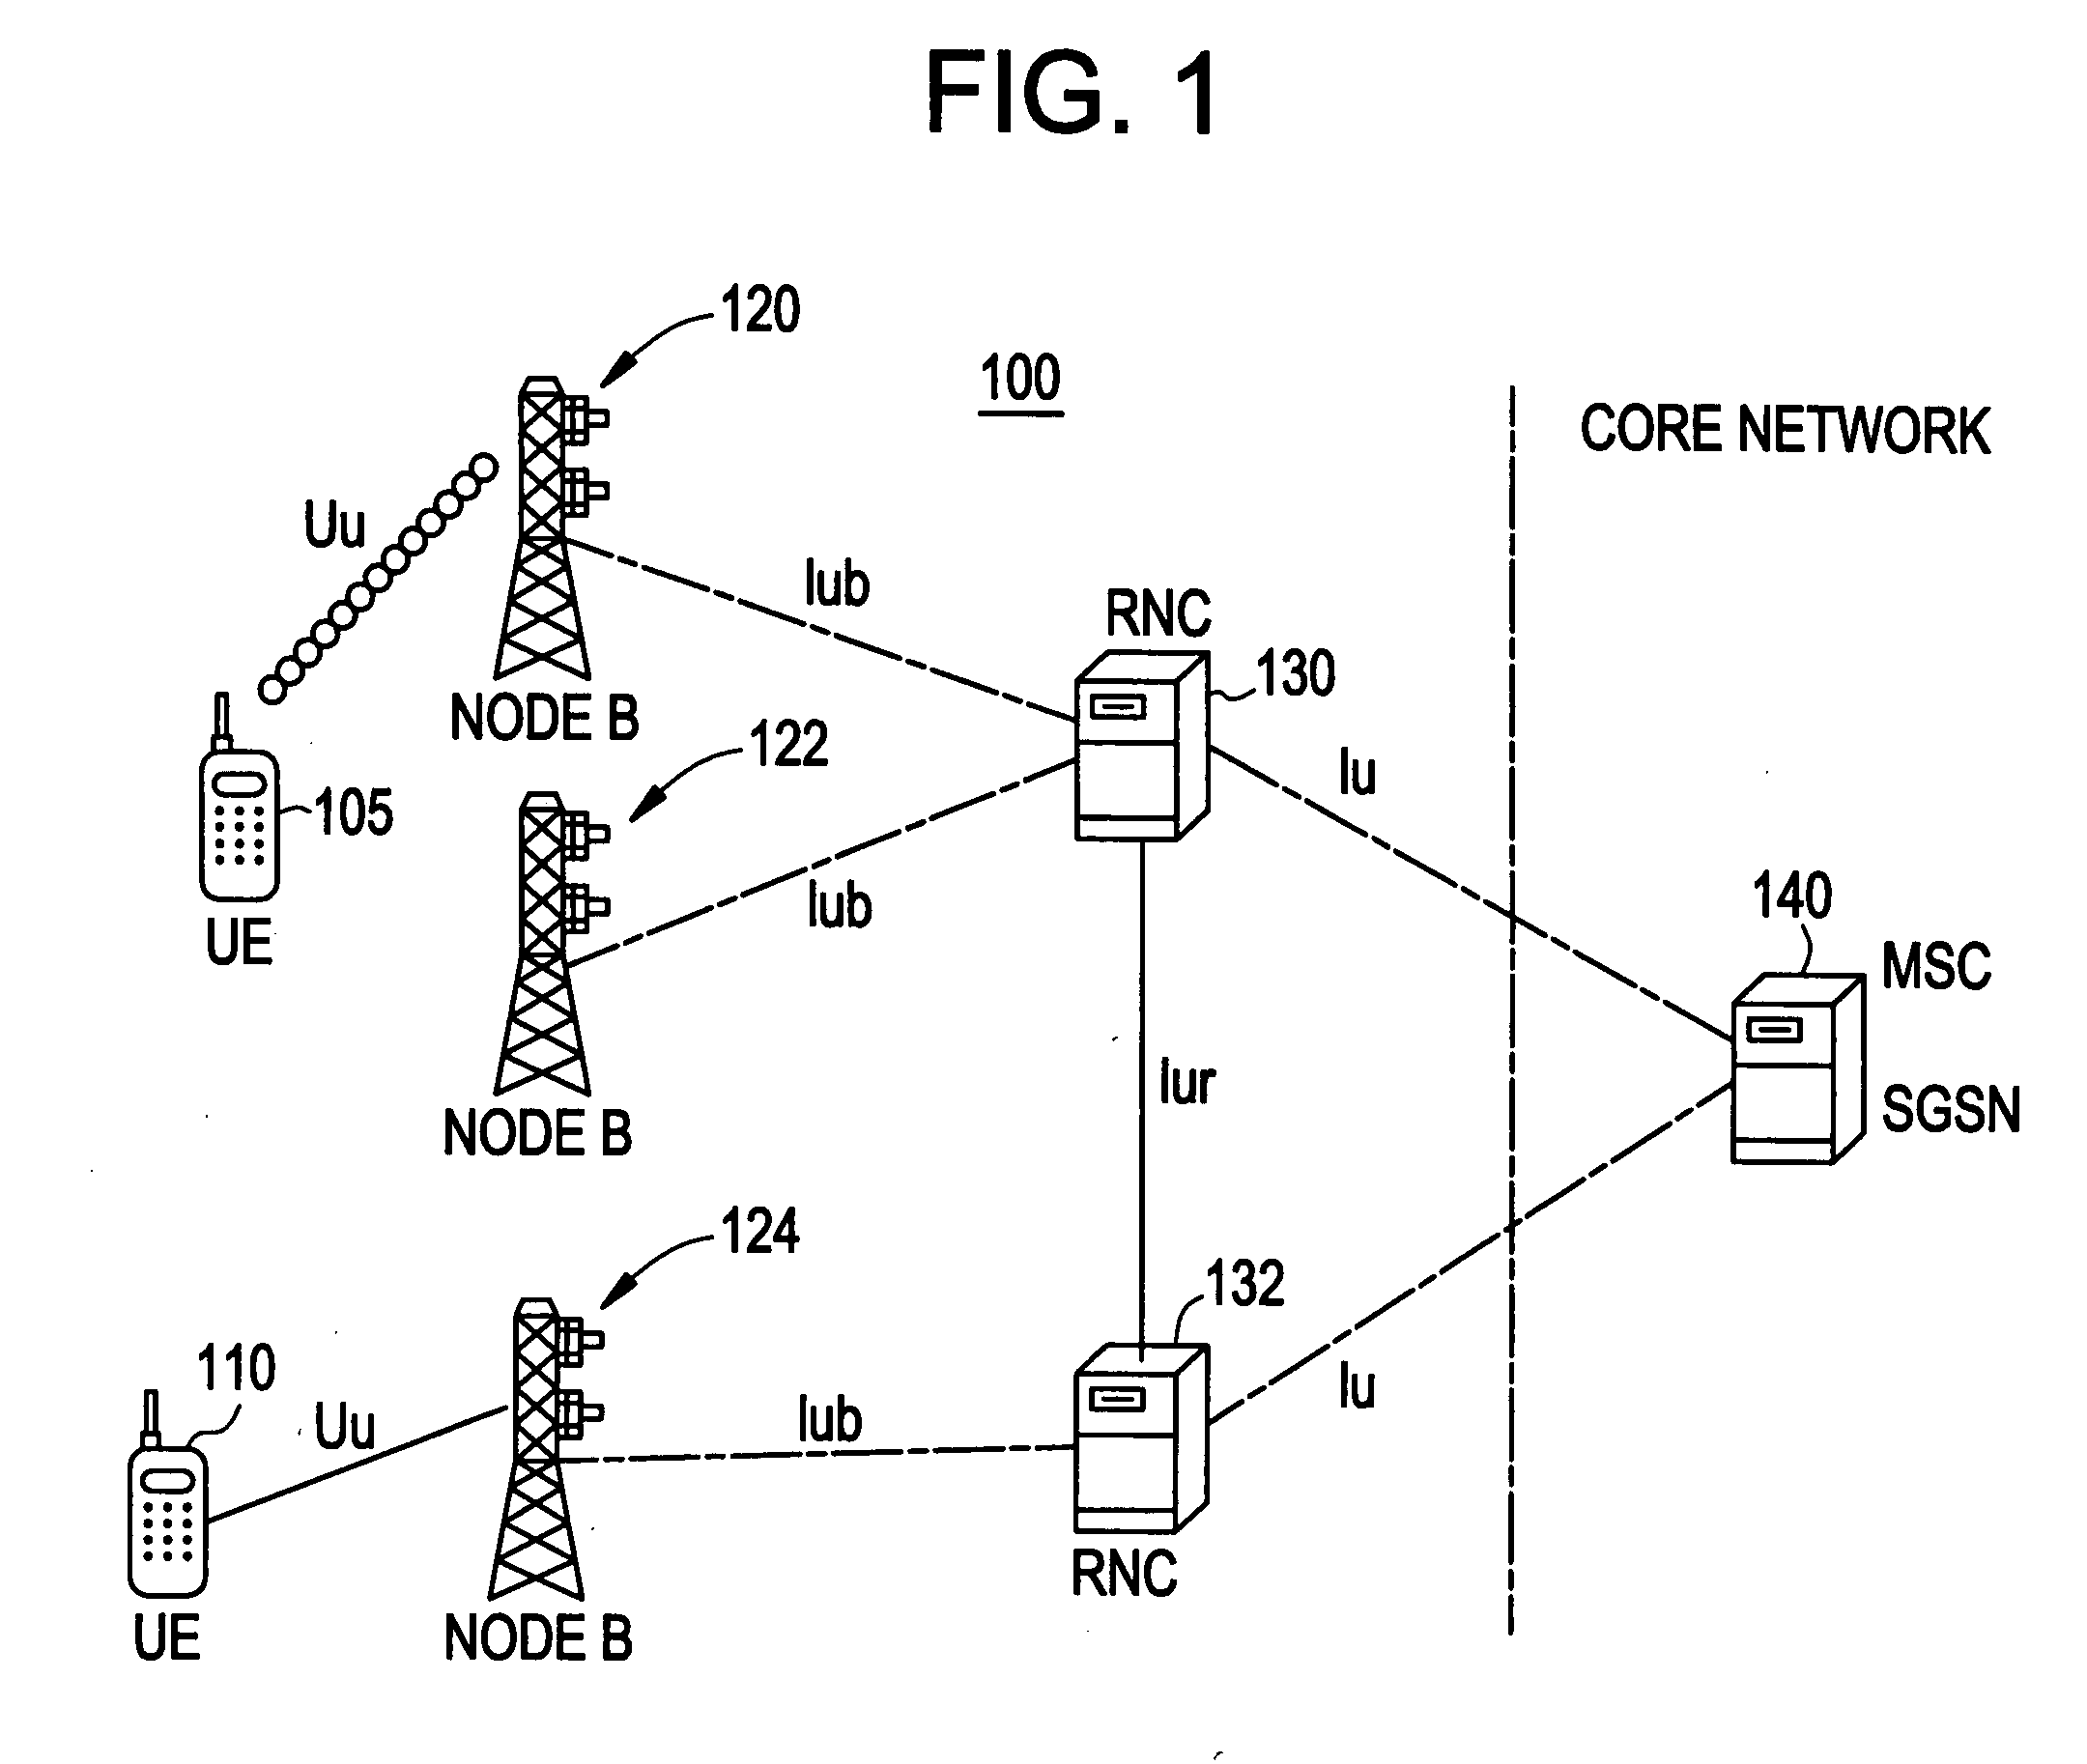 Method of scaling soft symbols of an uplink enhanced dedicated transport channel (E-DCH) and method for enabling use of a log-map turbo decoding algorithm for processing the E-DCH